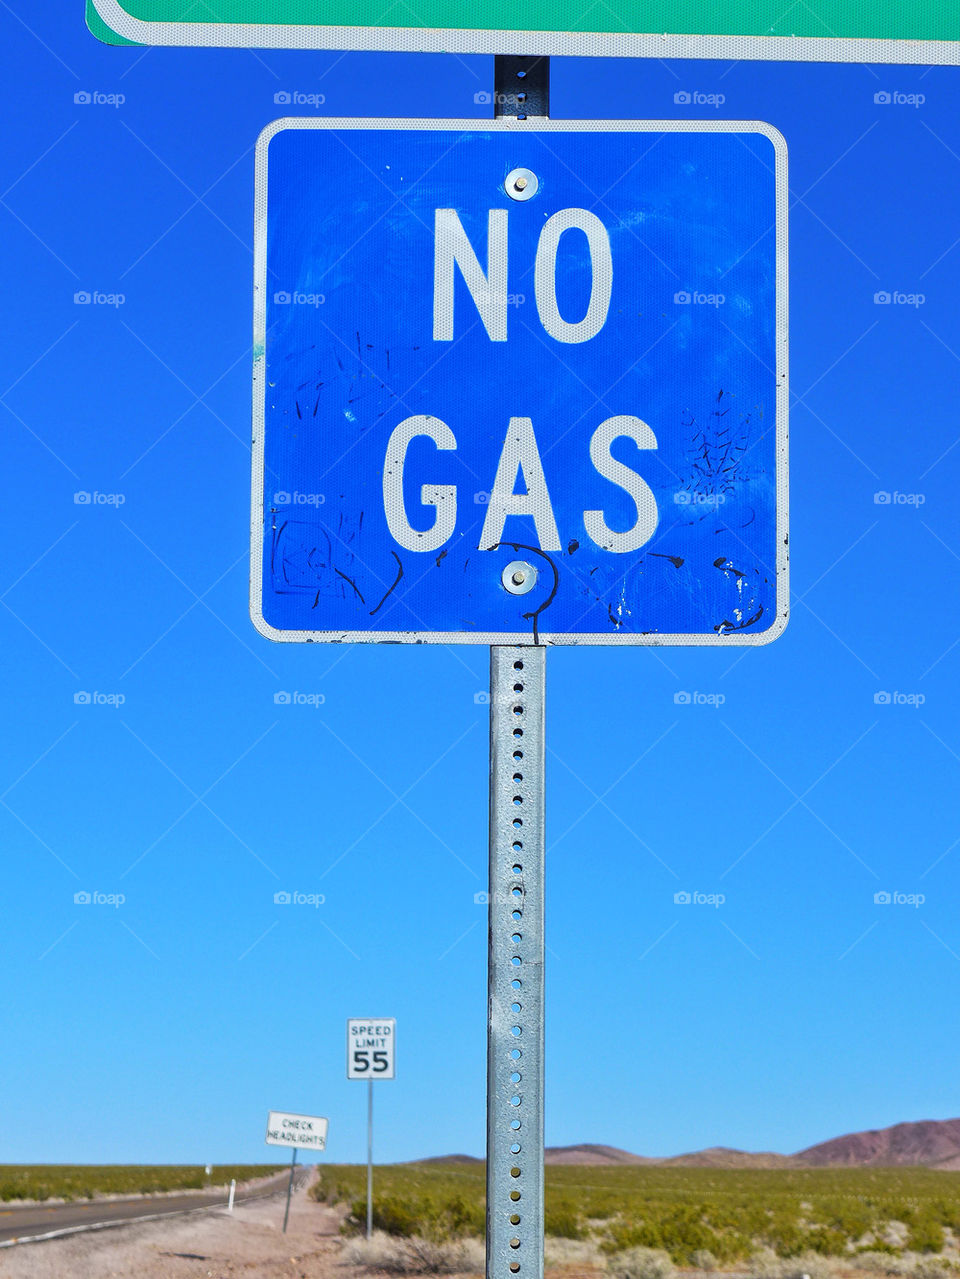 No gas road sign in the middle of nowhere